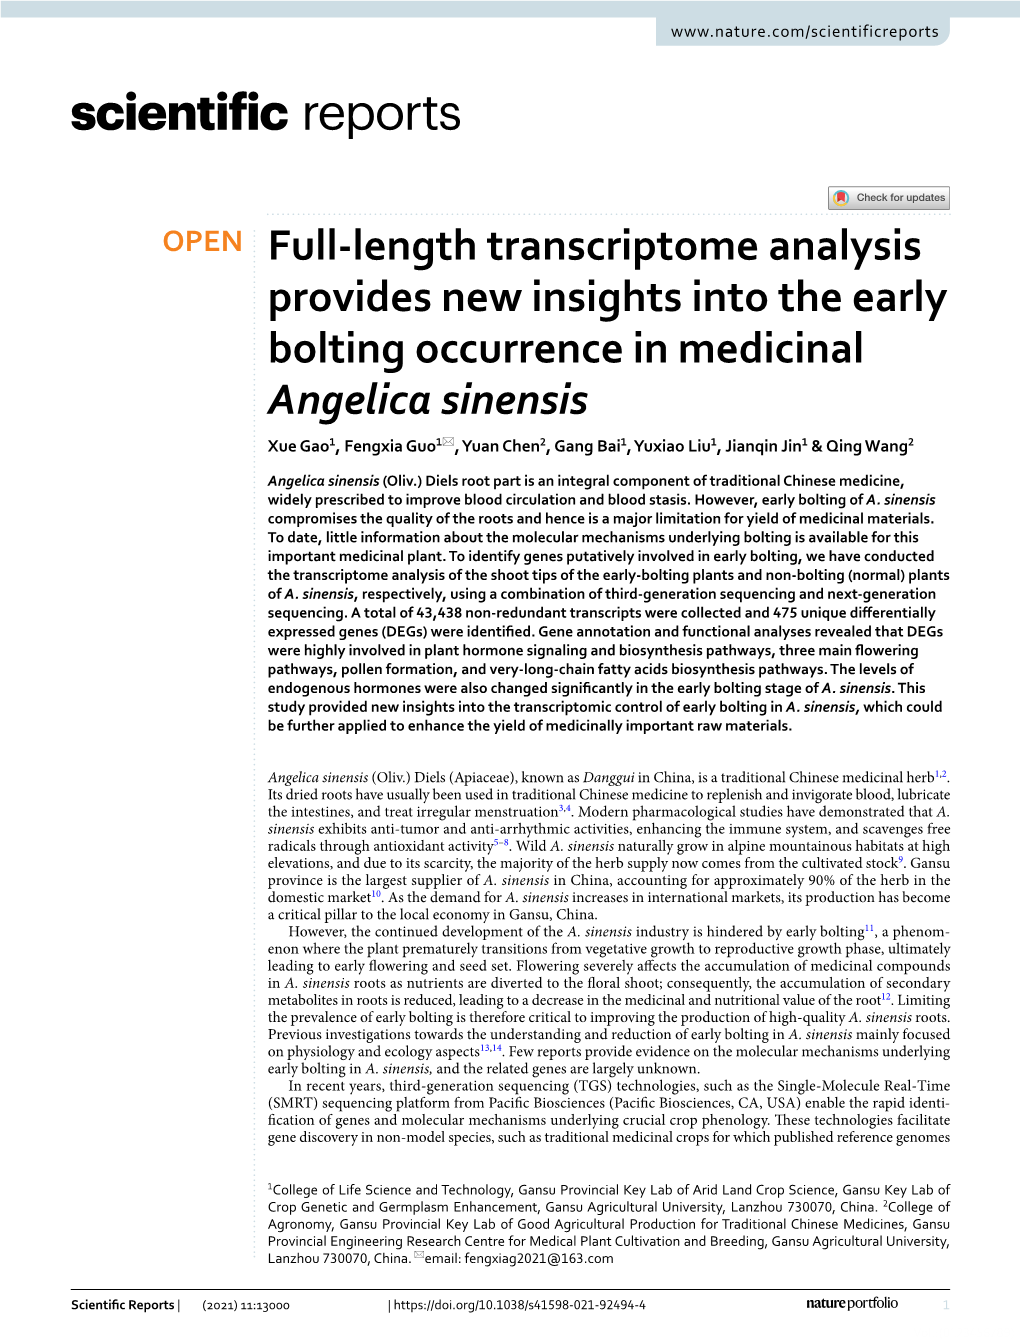 Full-Length Transcriptome Analysis Provides New Insights Into the Early